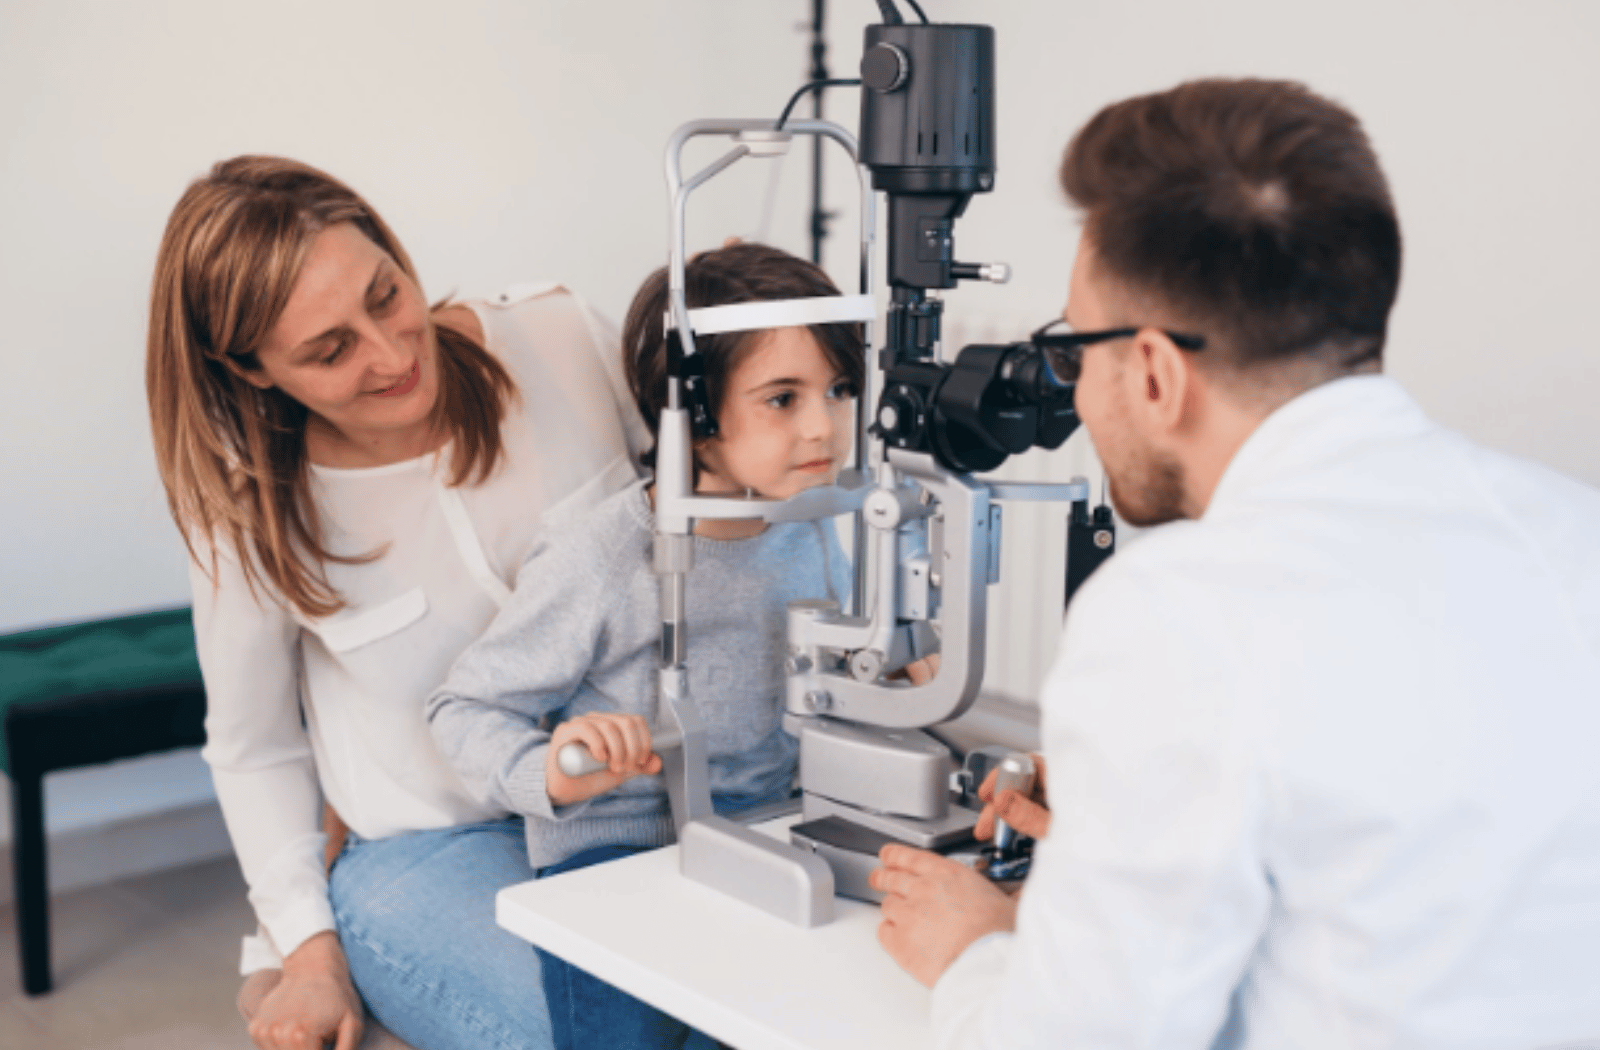 A male optometrist examines a little boy's eyes while the mother smiles.